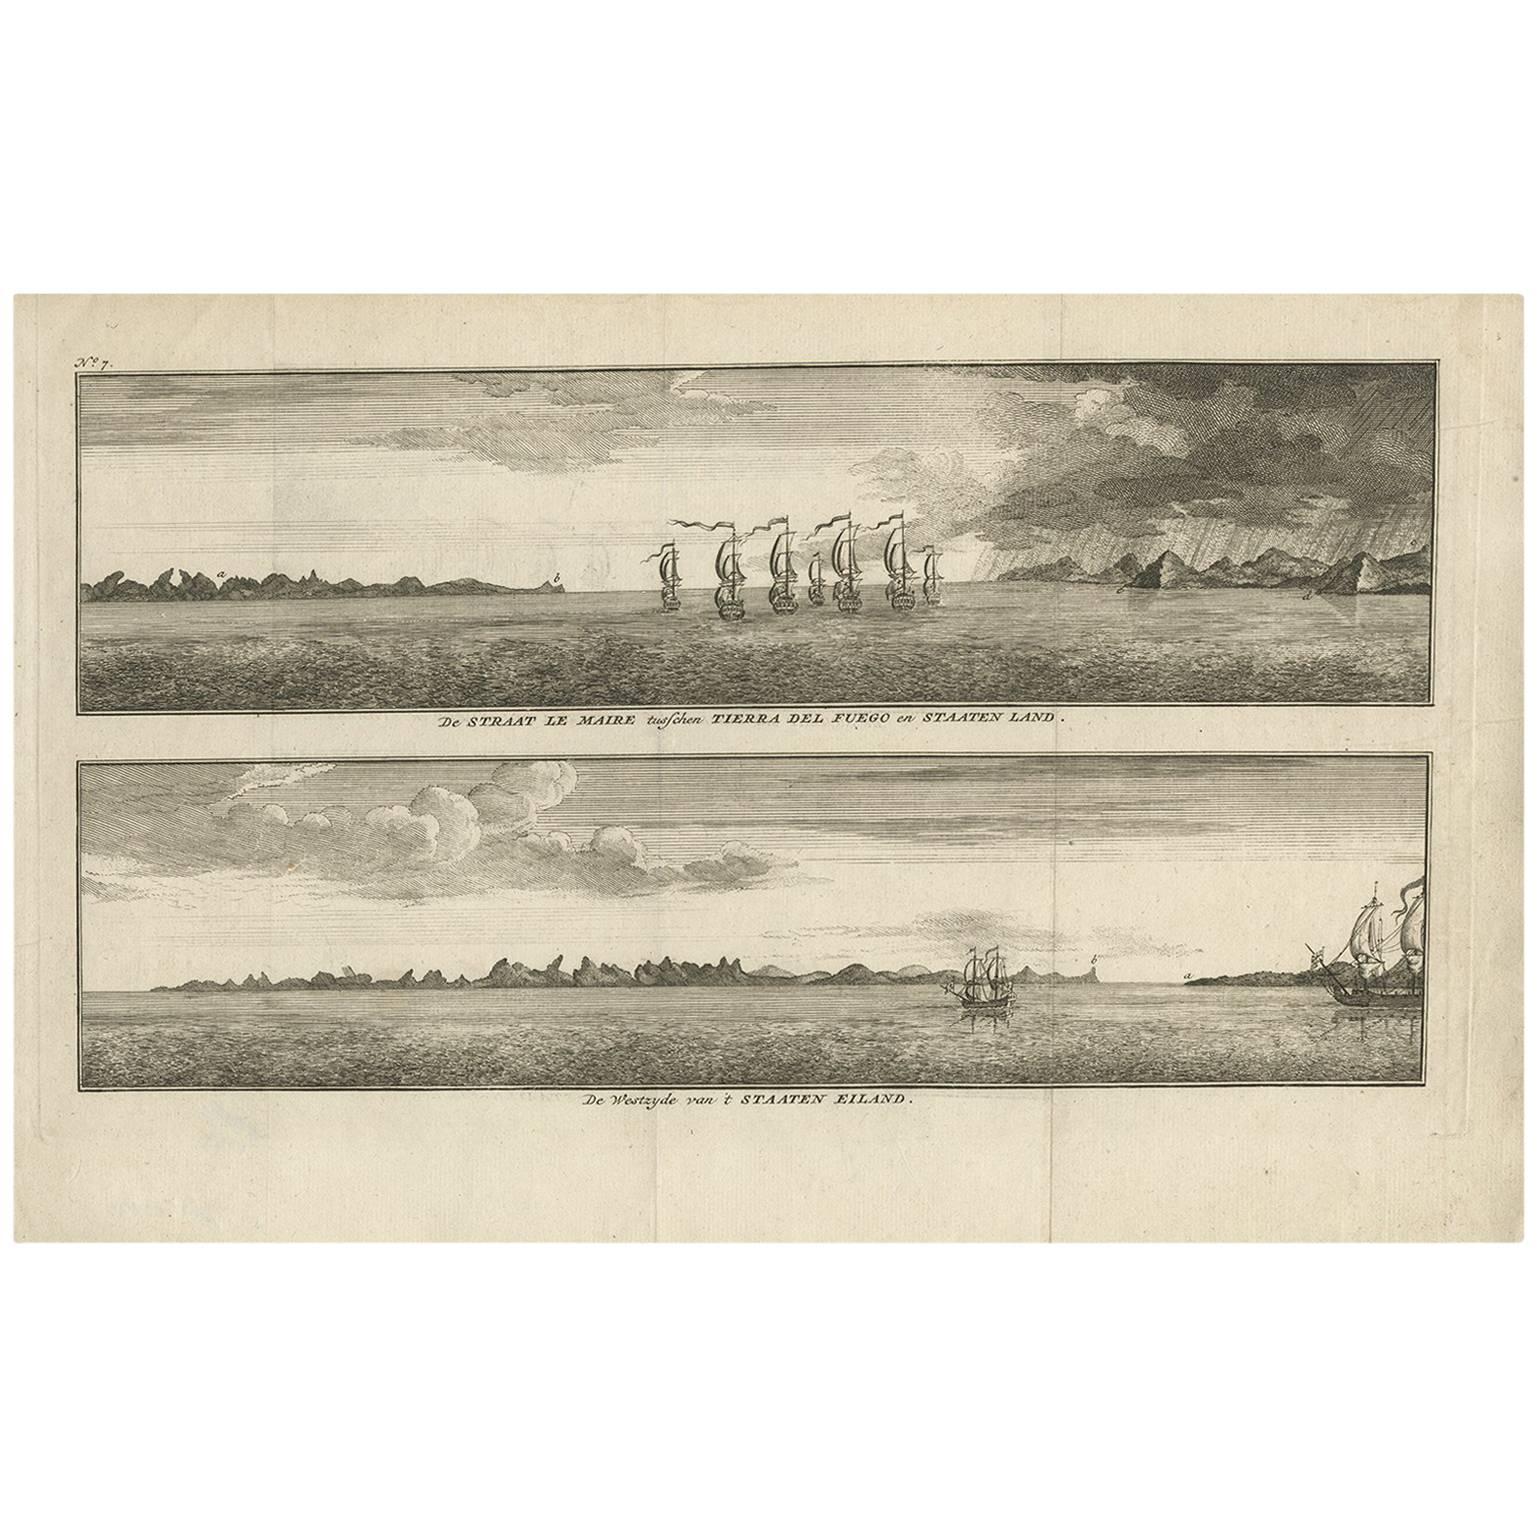 Antique Print with views of Staten Island and Tierra del Fuego by Anson (c.1760)